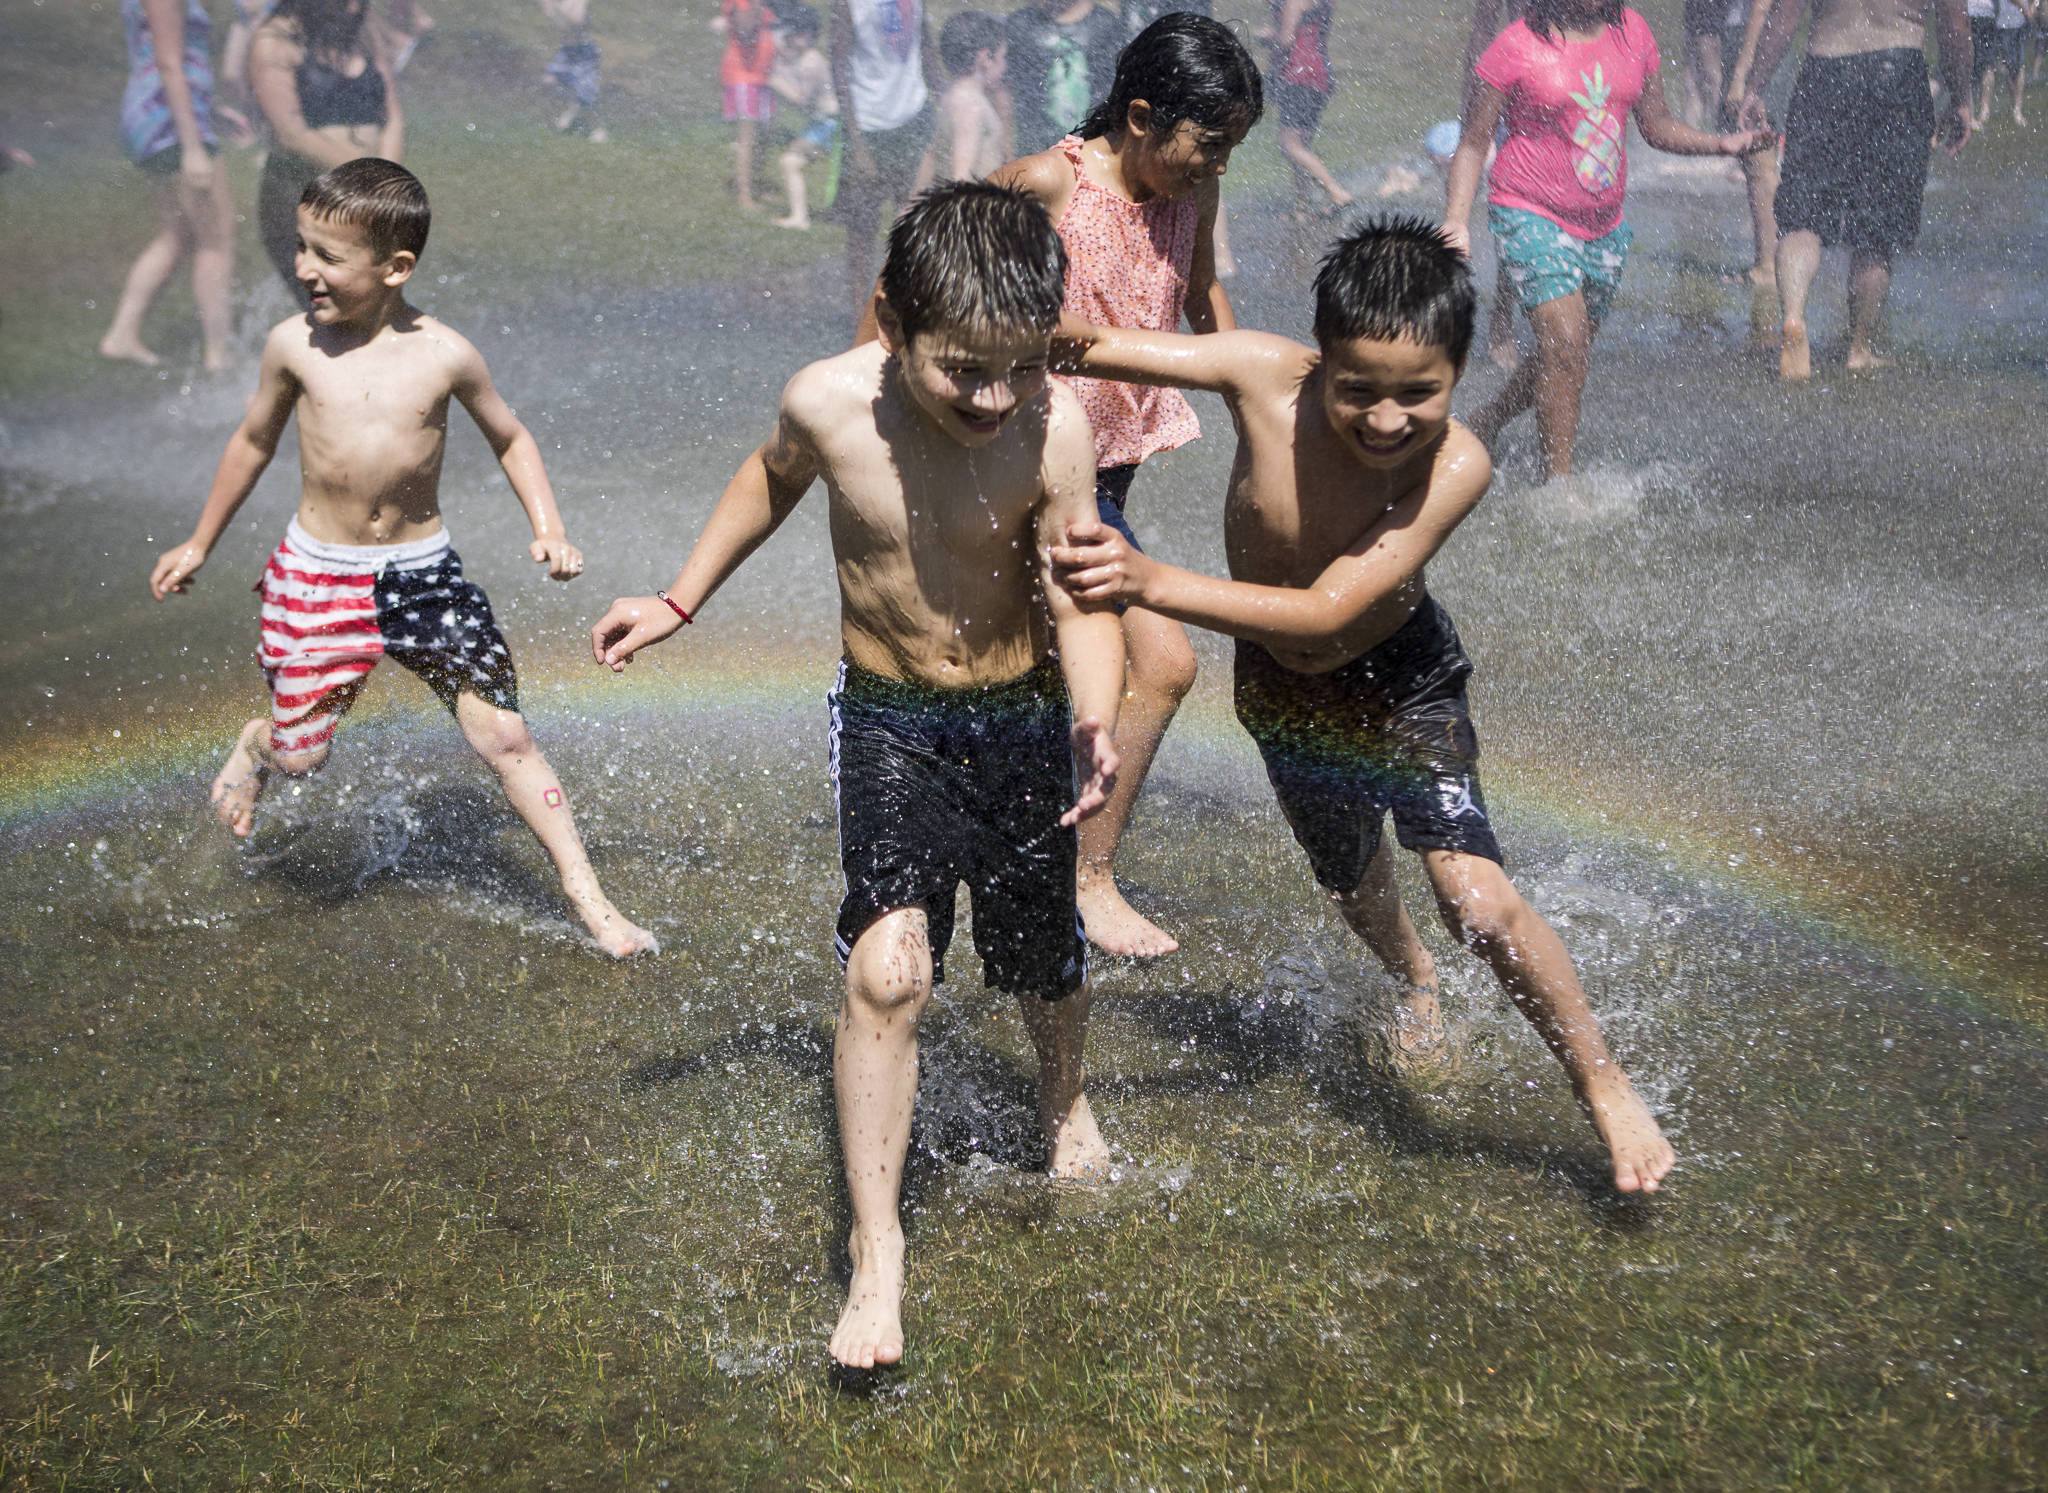 David Parada, 7, left, and Abel Parada, 8, run through a heavy spray of water creating a rainbow Saturday at Walter E. Hall Parkin Everett. The Everett Fire Department set up a fire hose sprinkler station to help people cool down and escape the heat. (Olivia Vanni / The Herald)